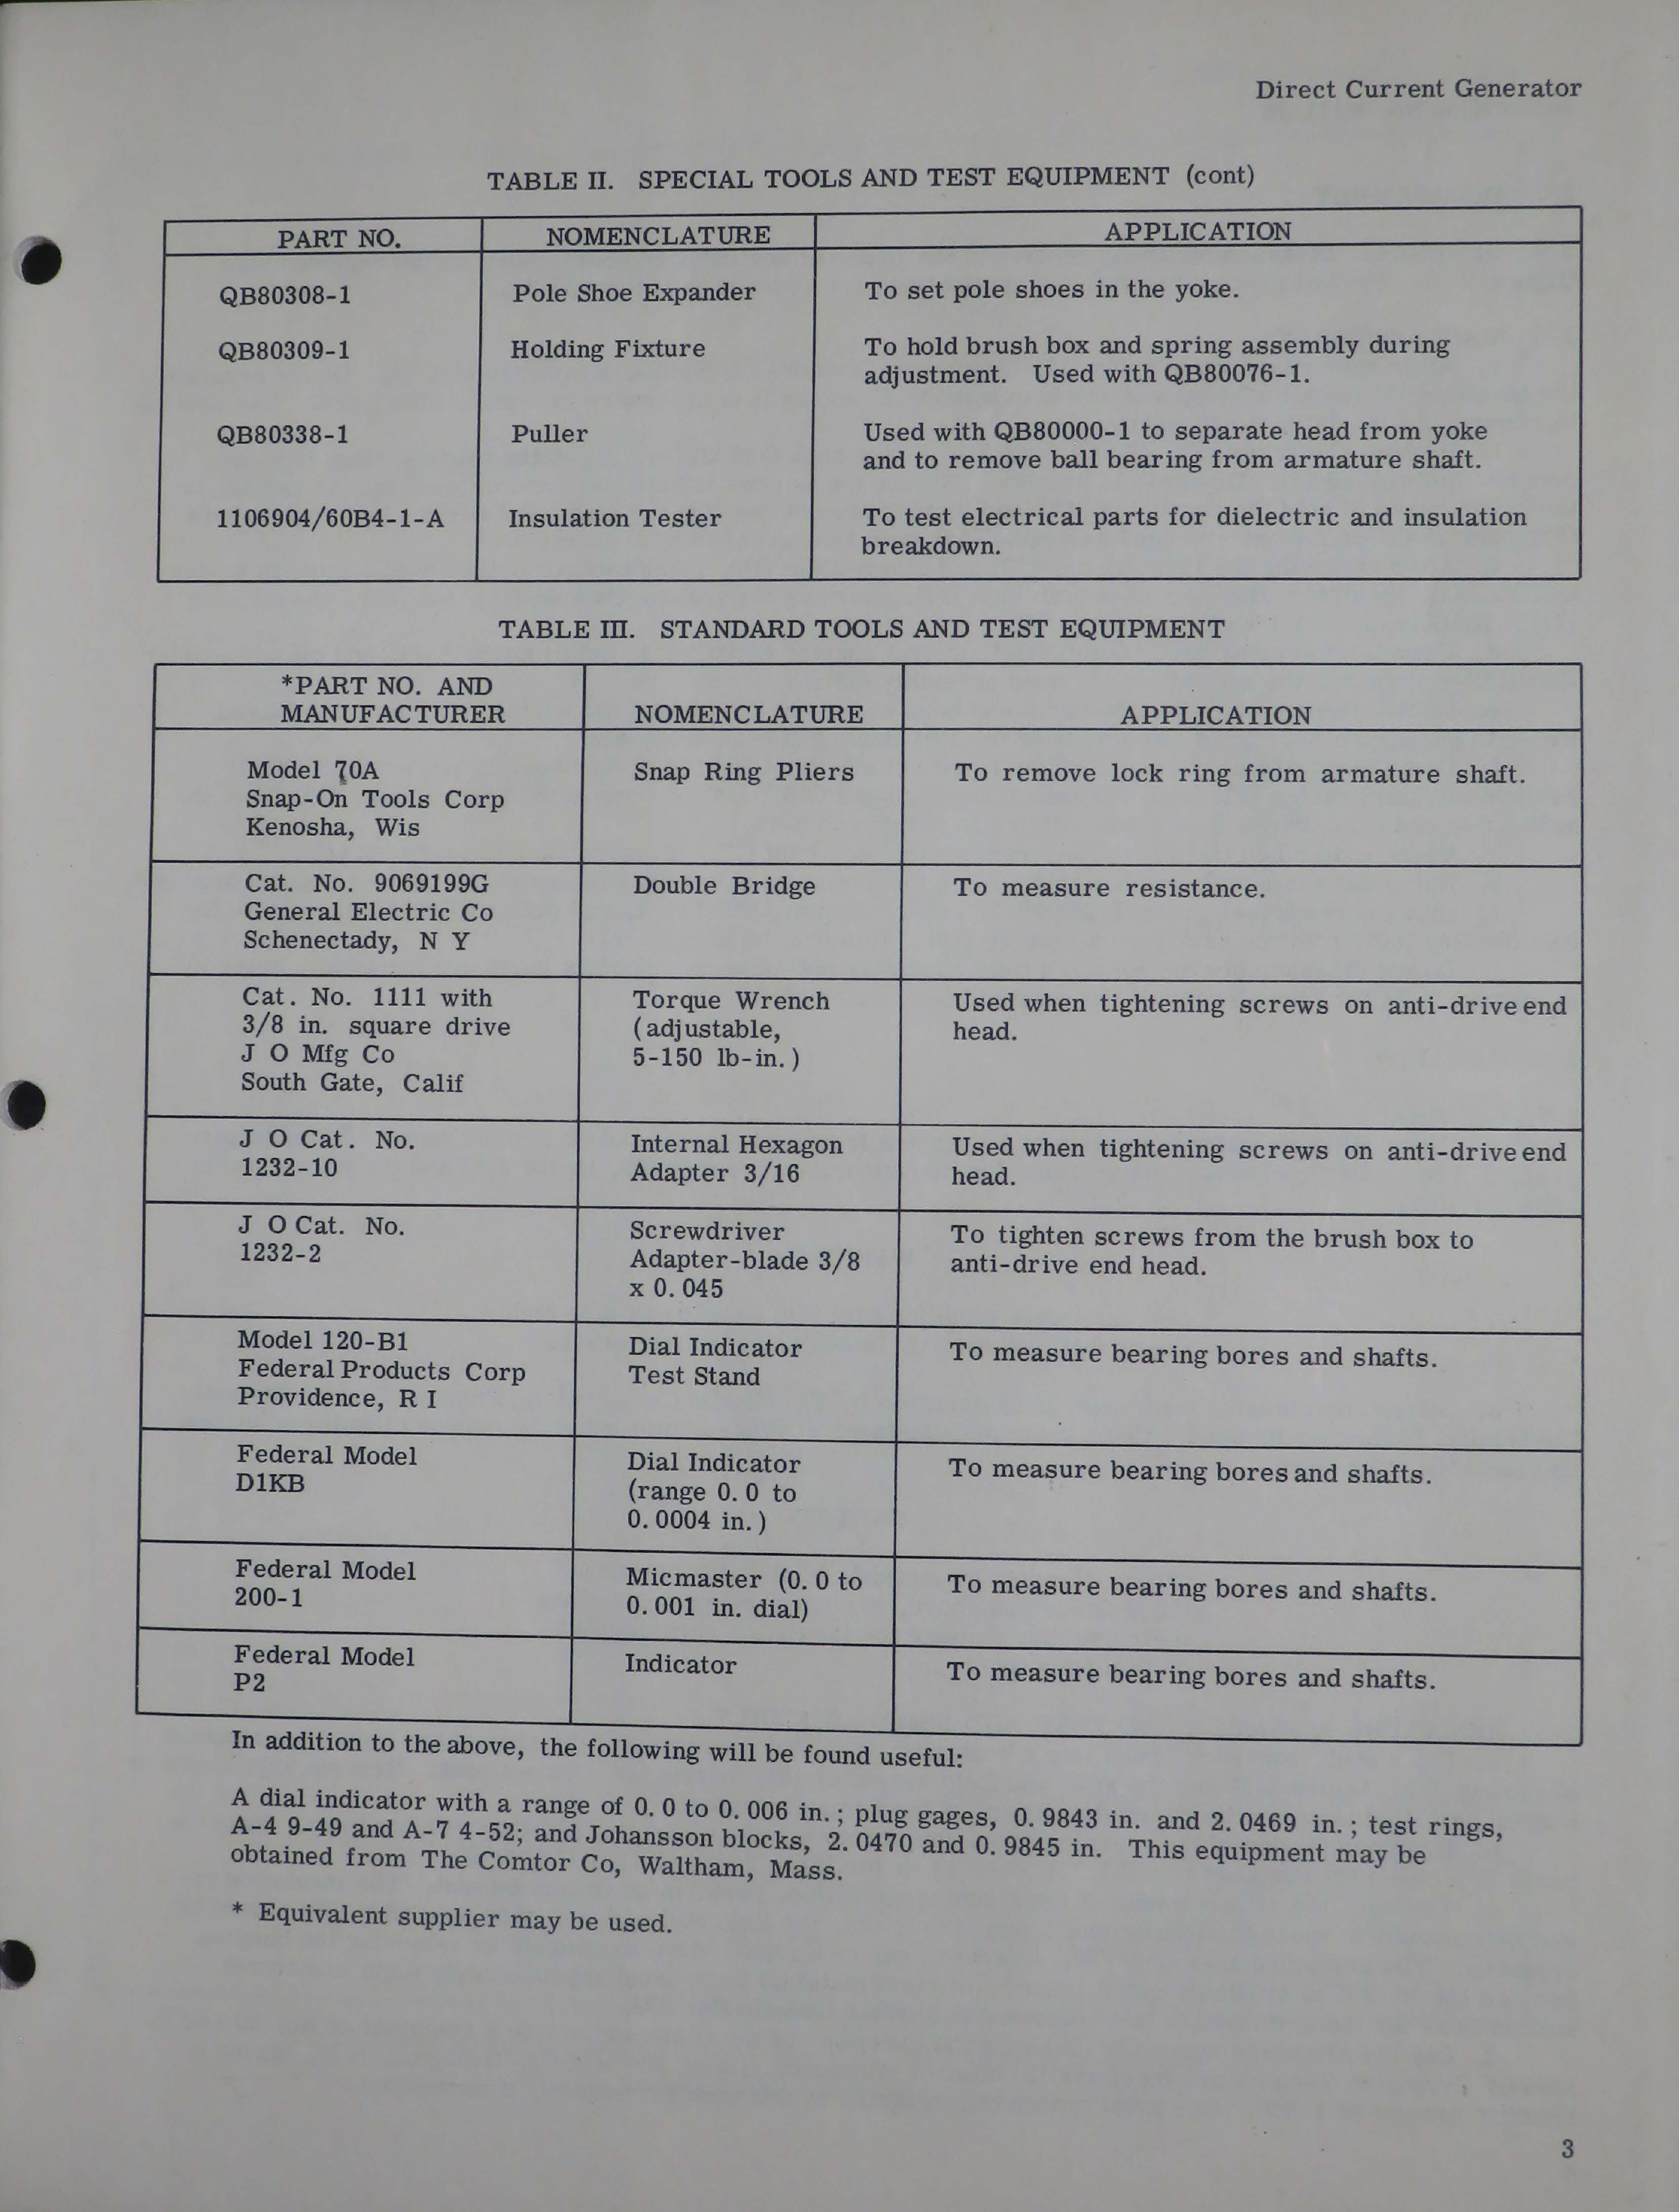 Sample page 7 from AirCorps Library document: Overhaul Instructions for Direct Current Generators